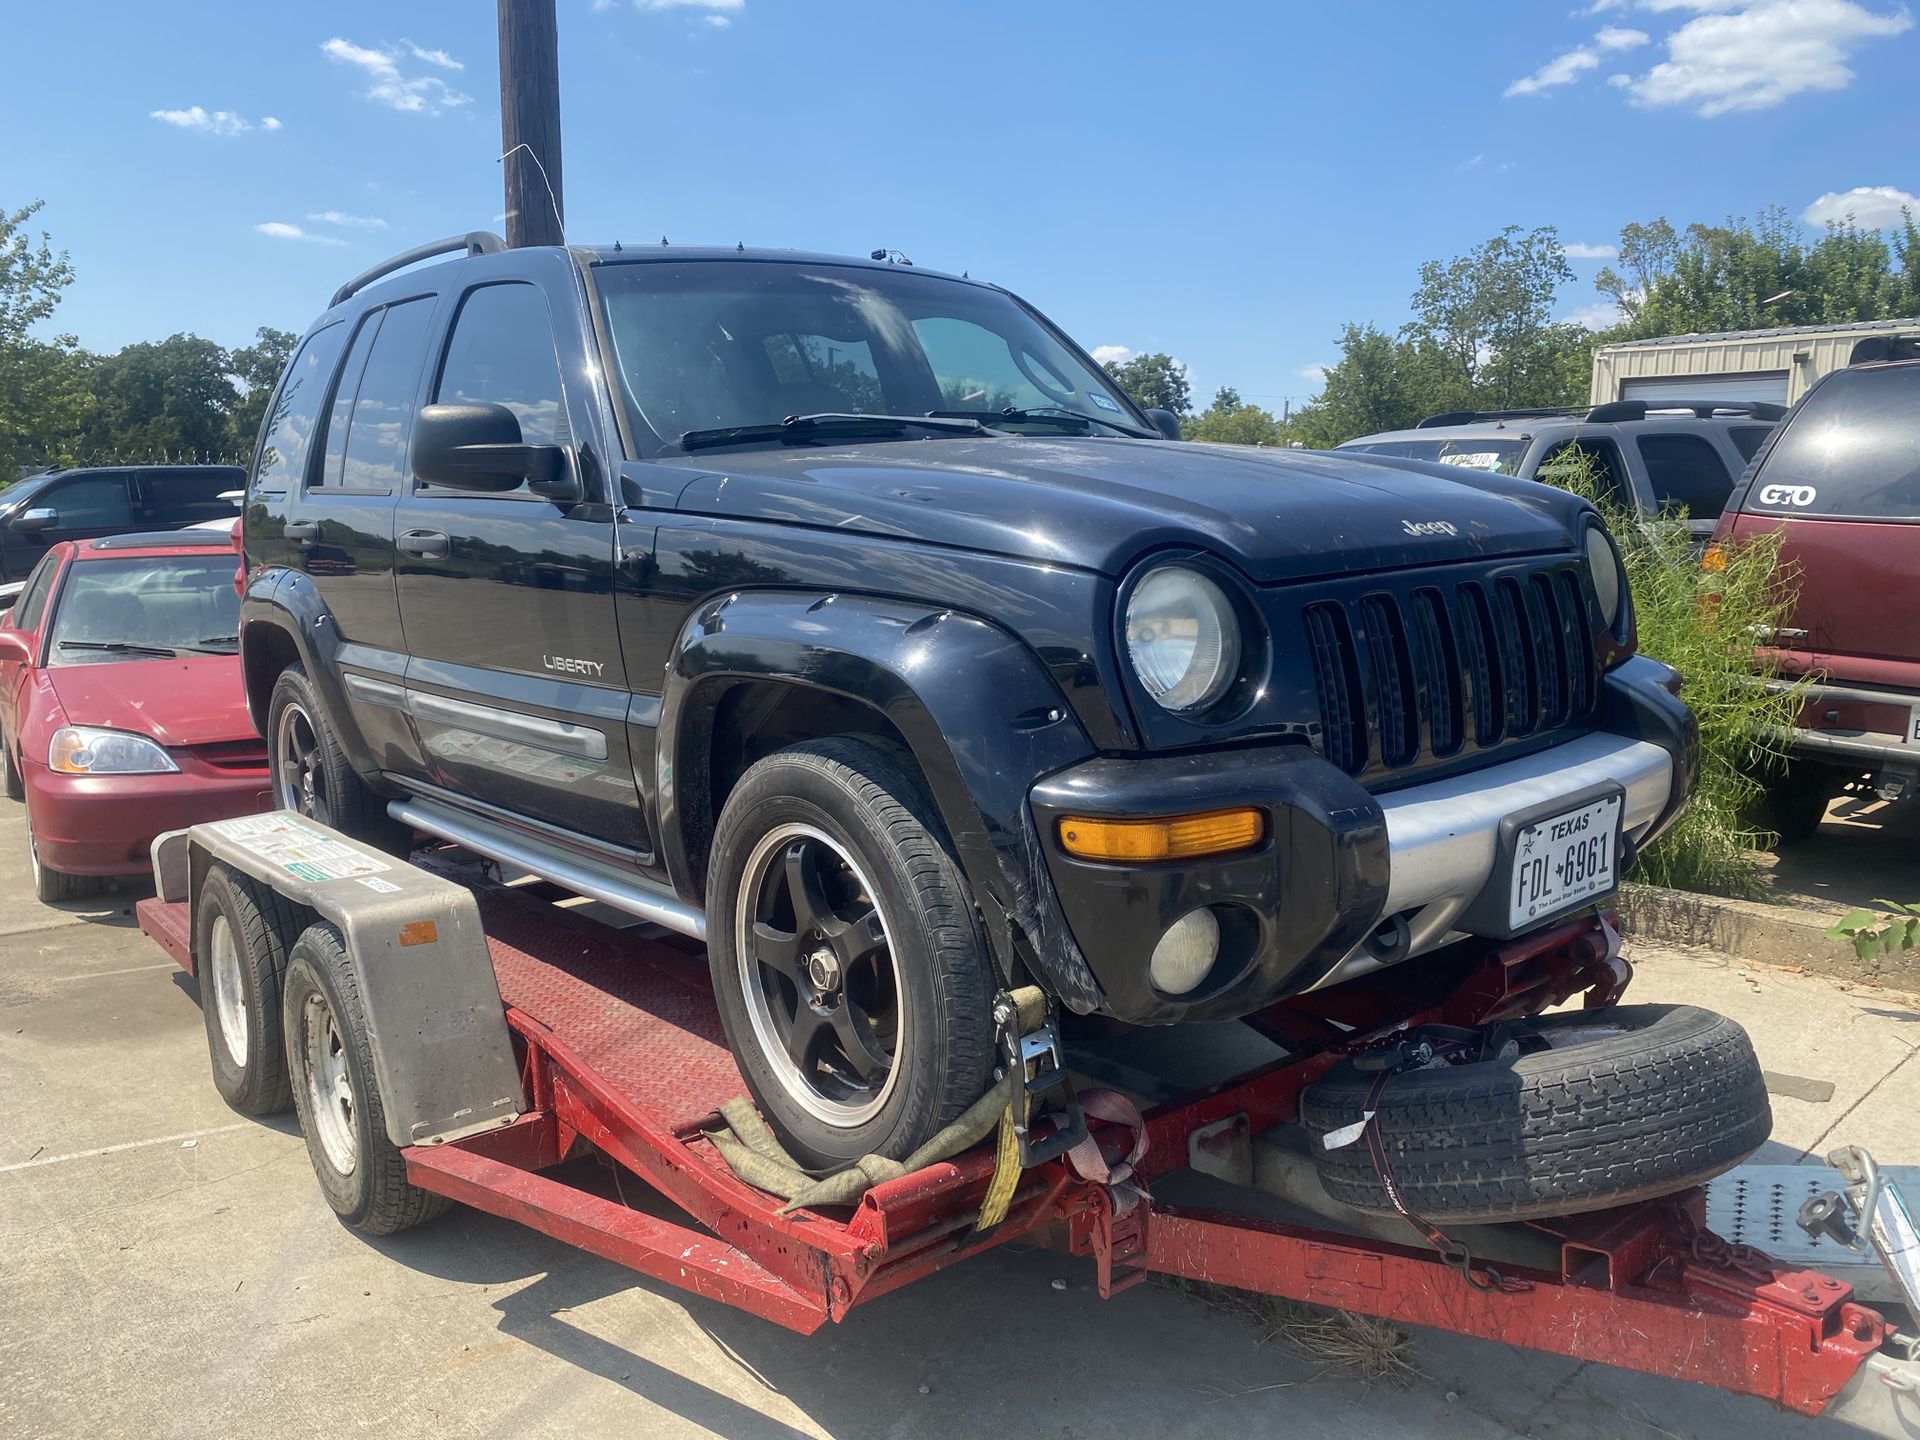 2003-2007 Jeep Liberty for Parts